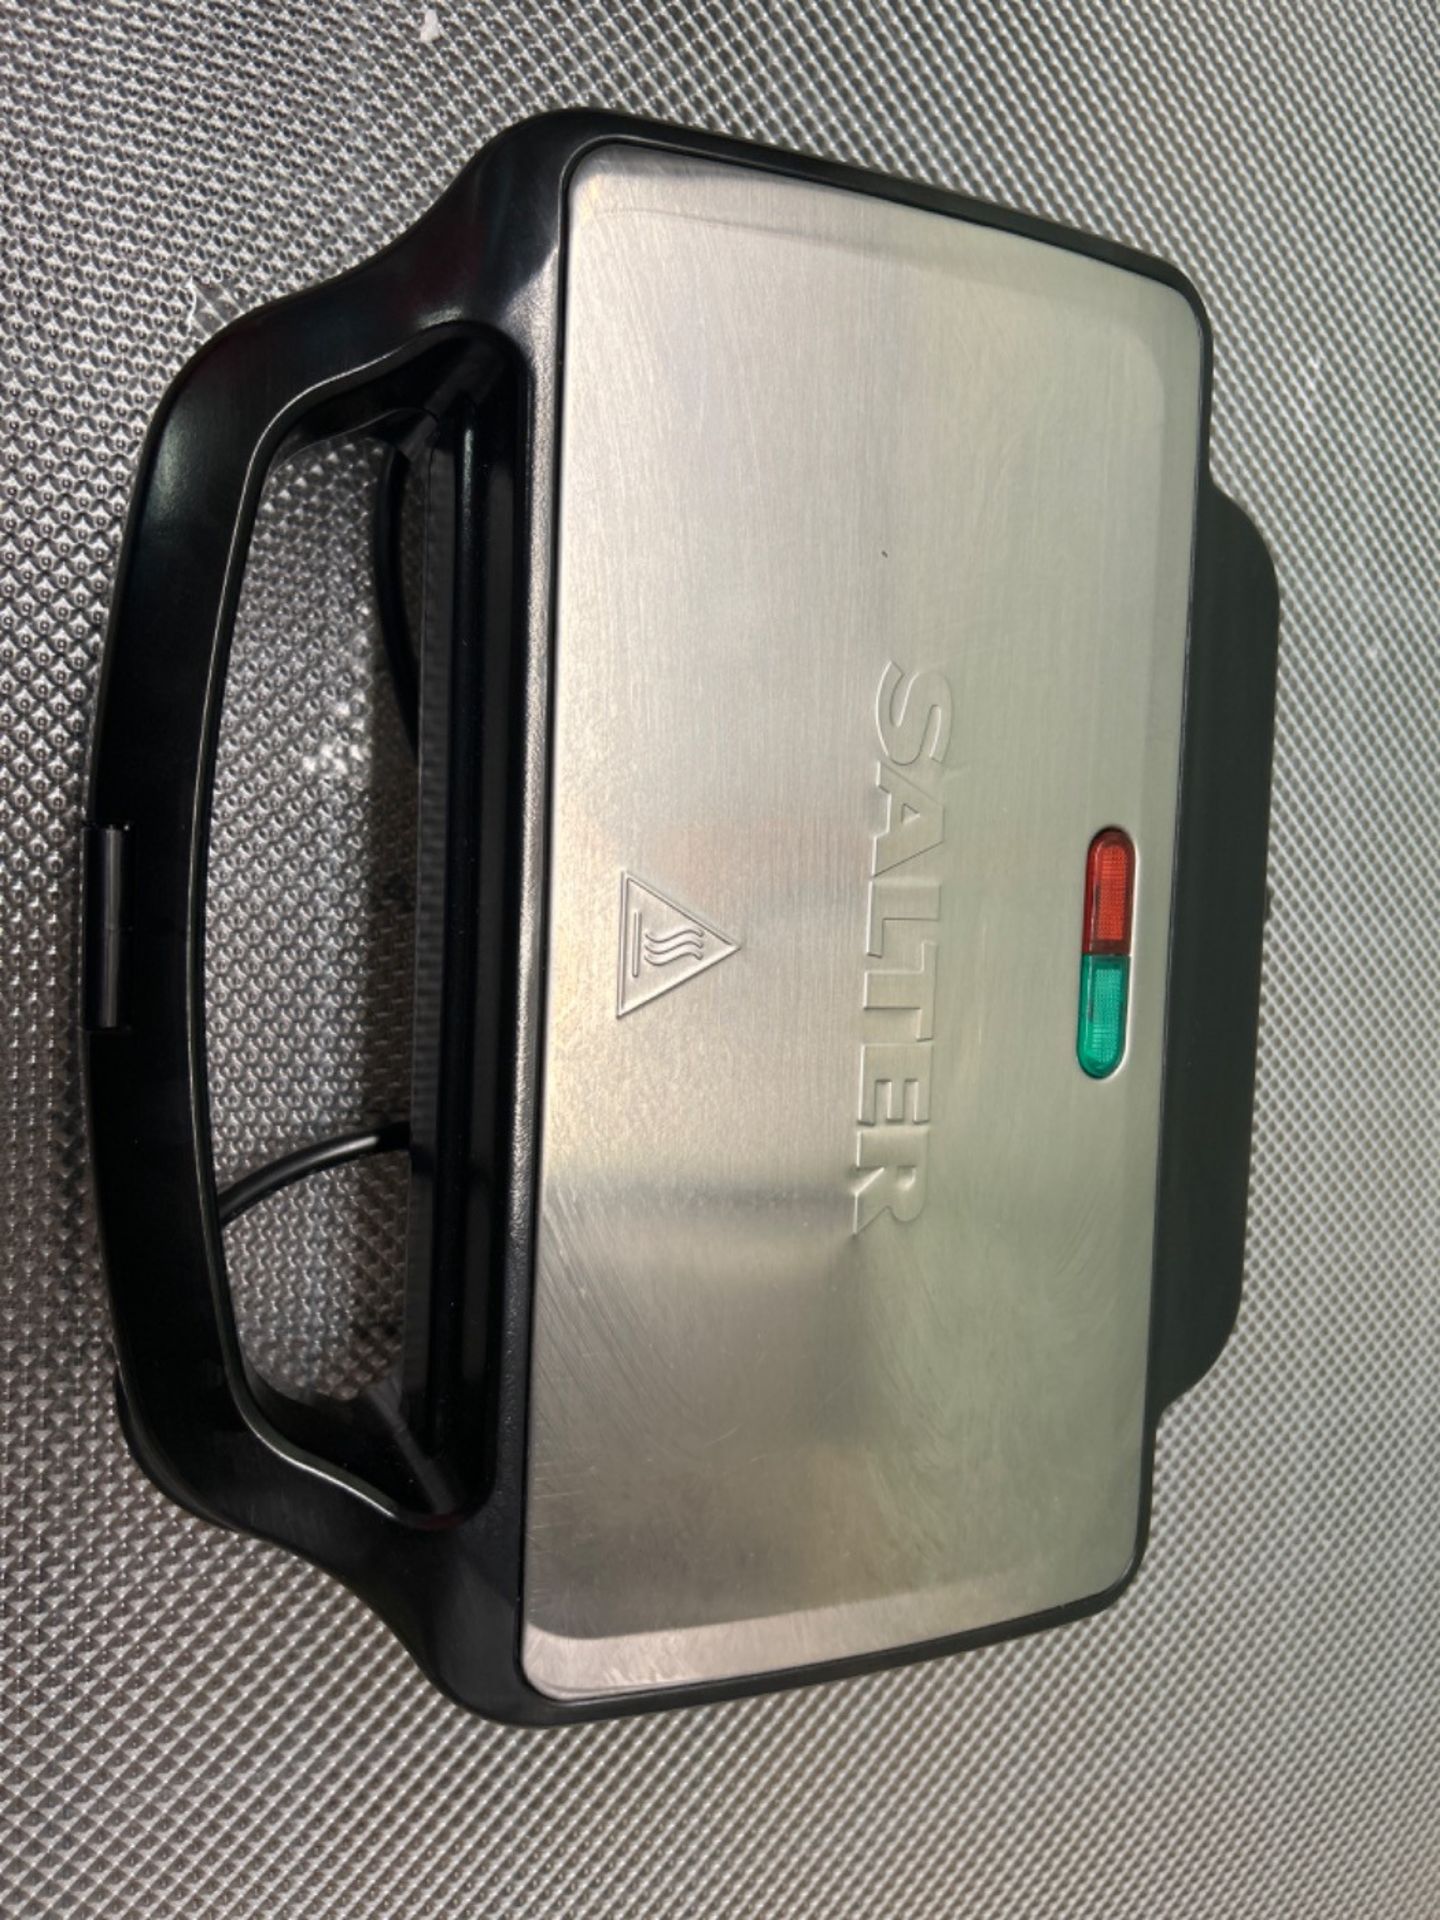 Salter EK2249 Deep Fill Waffle Maker ??Non-Stick Dual Waffle Iron, XL Cooking Plates, Automatic T - Image 3 of 3